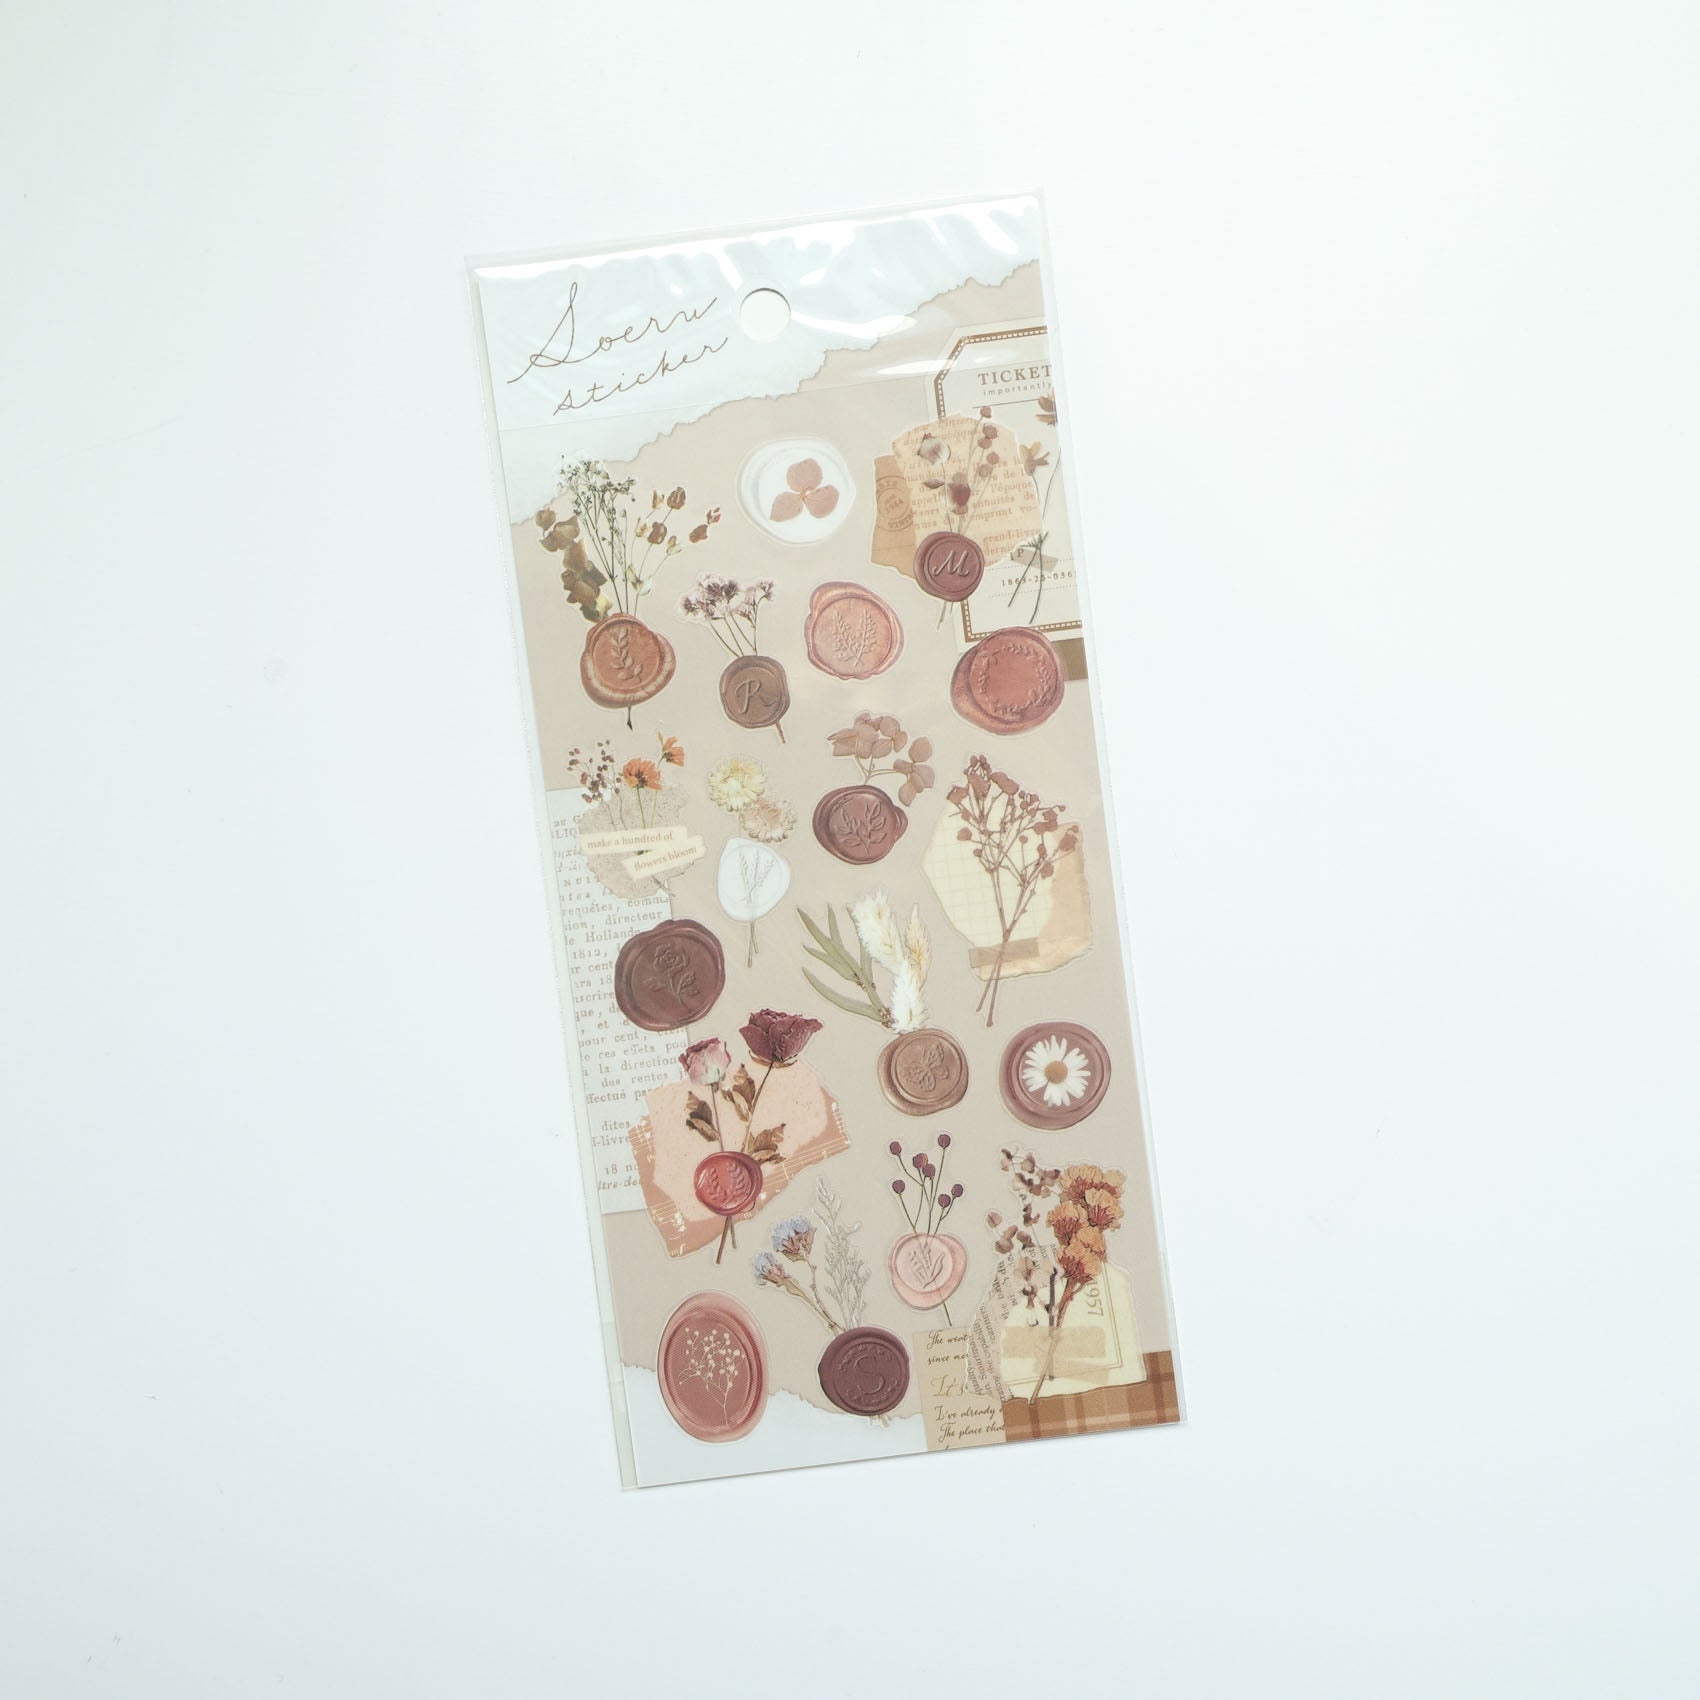 Soeru Sticker Sheet with Floral Wax Seal Pictures - Brown